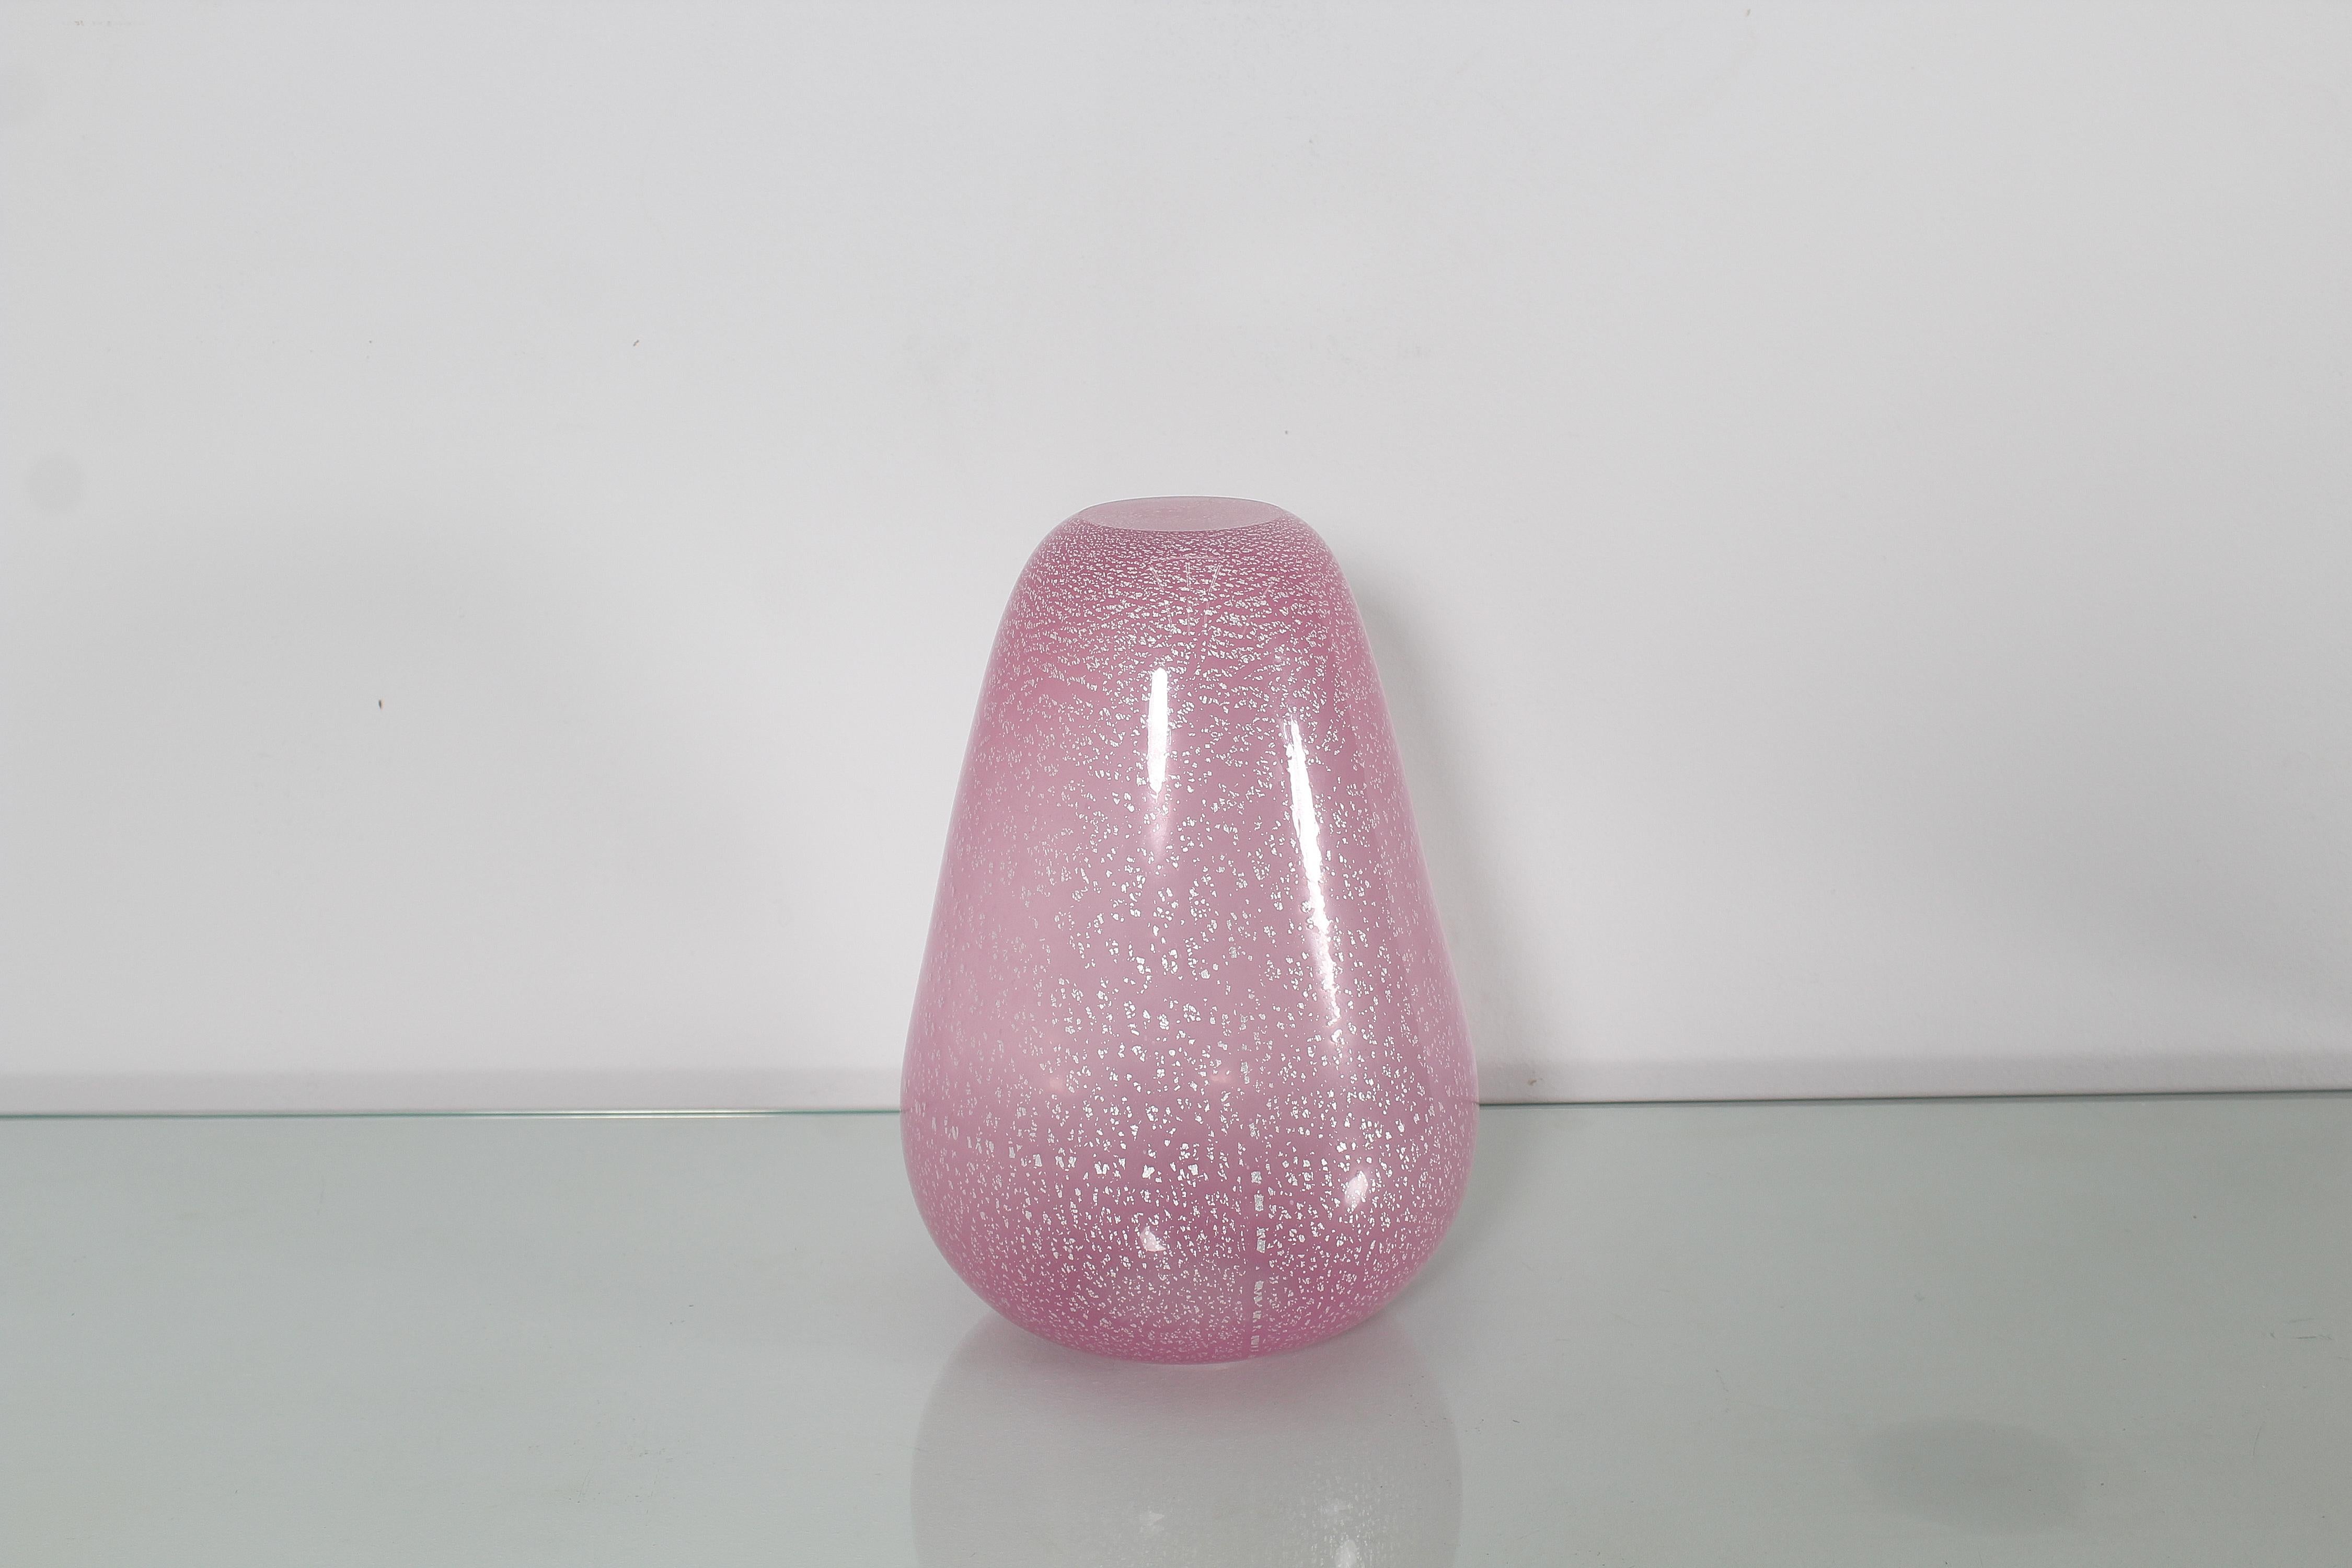 Elegant pink Murano blown glass vase with silver leaf inclusions. Attributable to Barovier & Toso, venetian manifacture in the 60s.
Wear consistent with age and use.